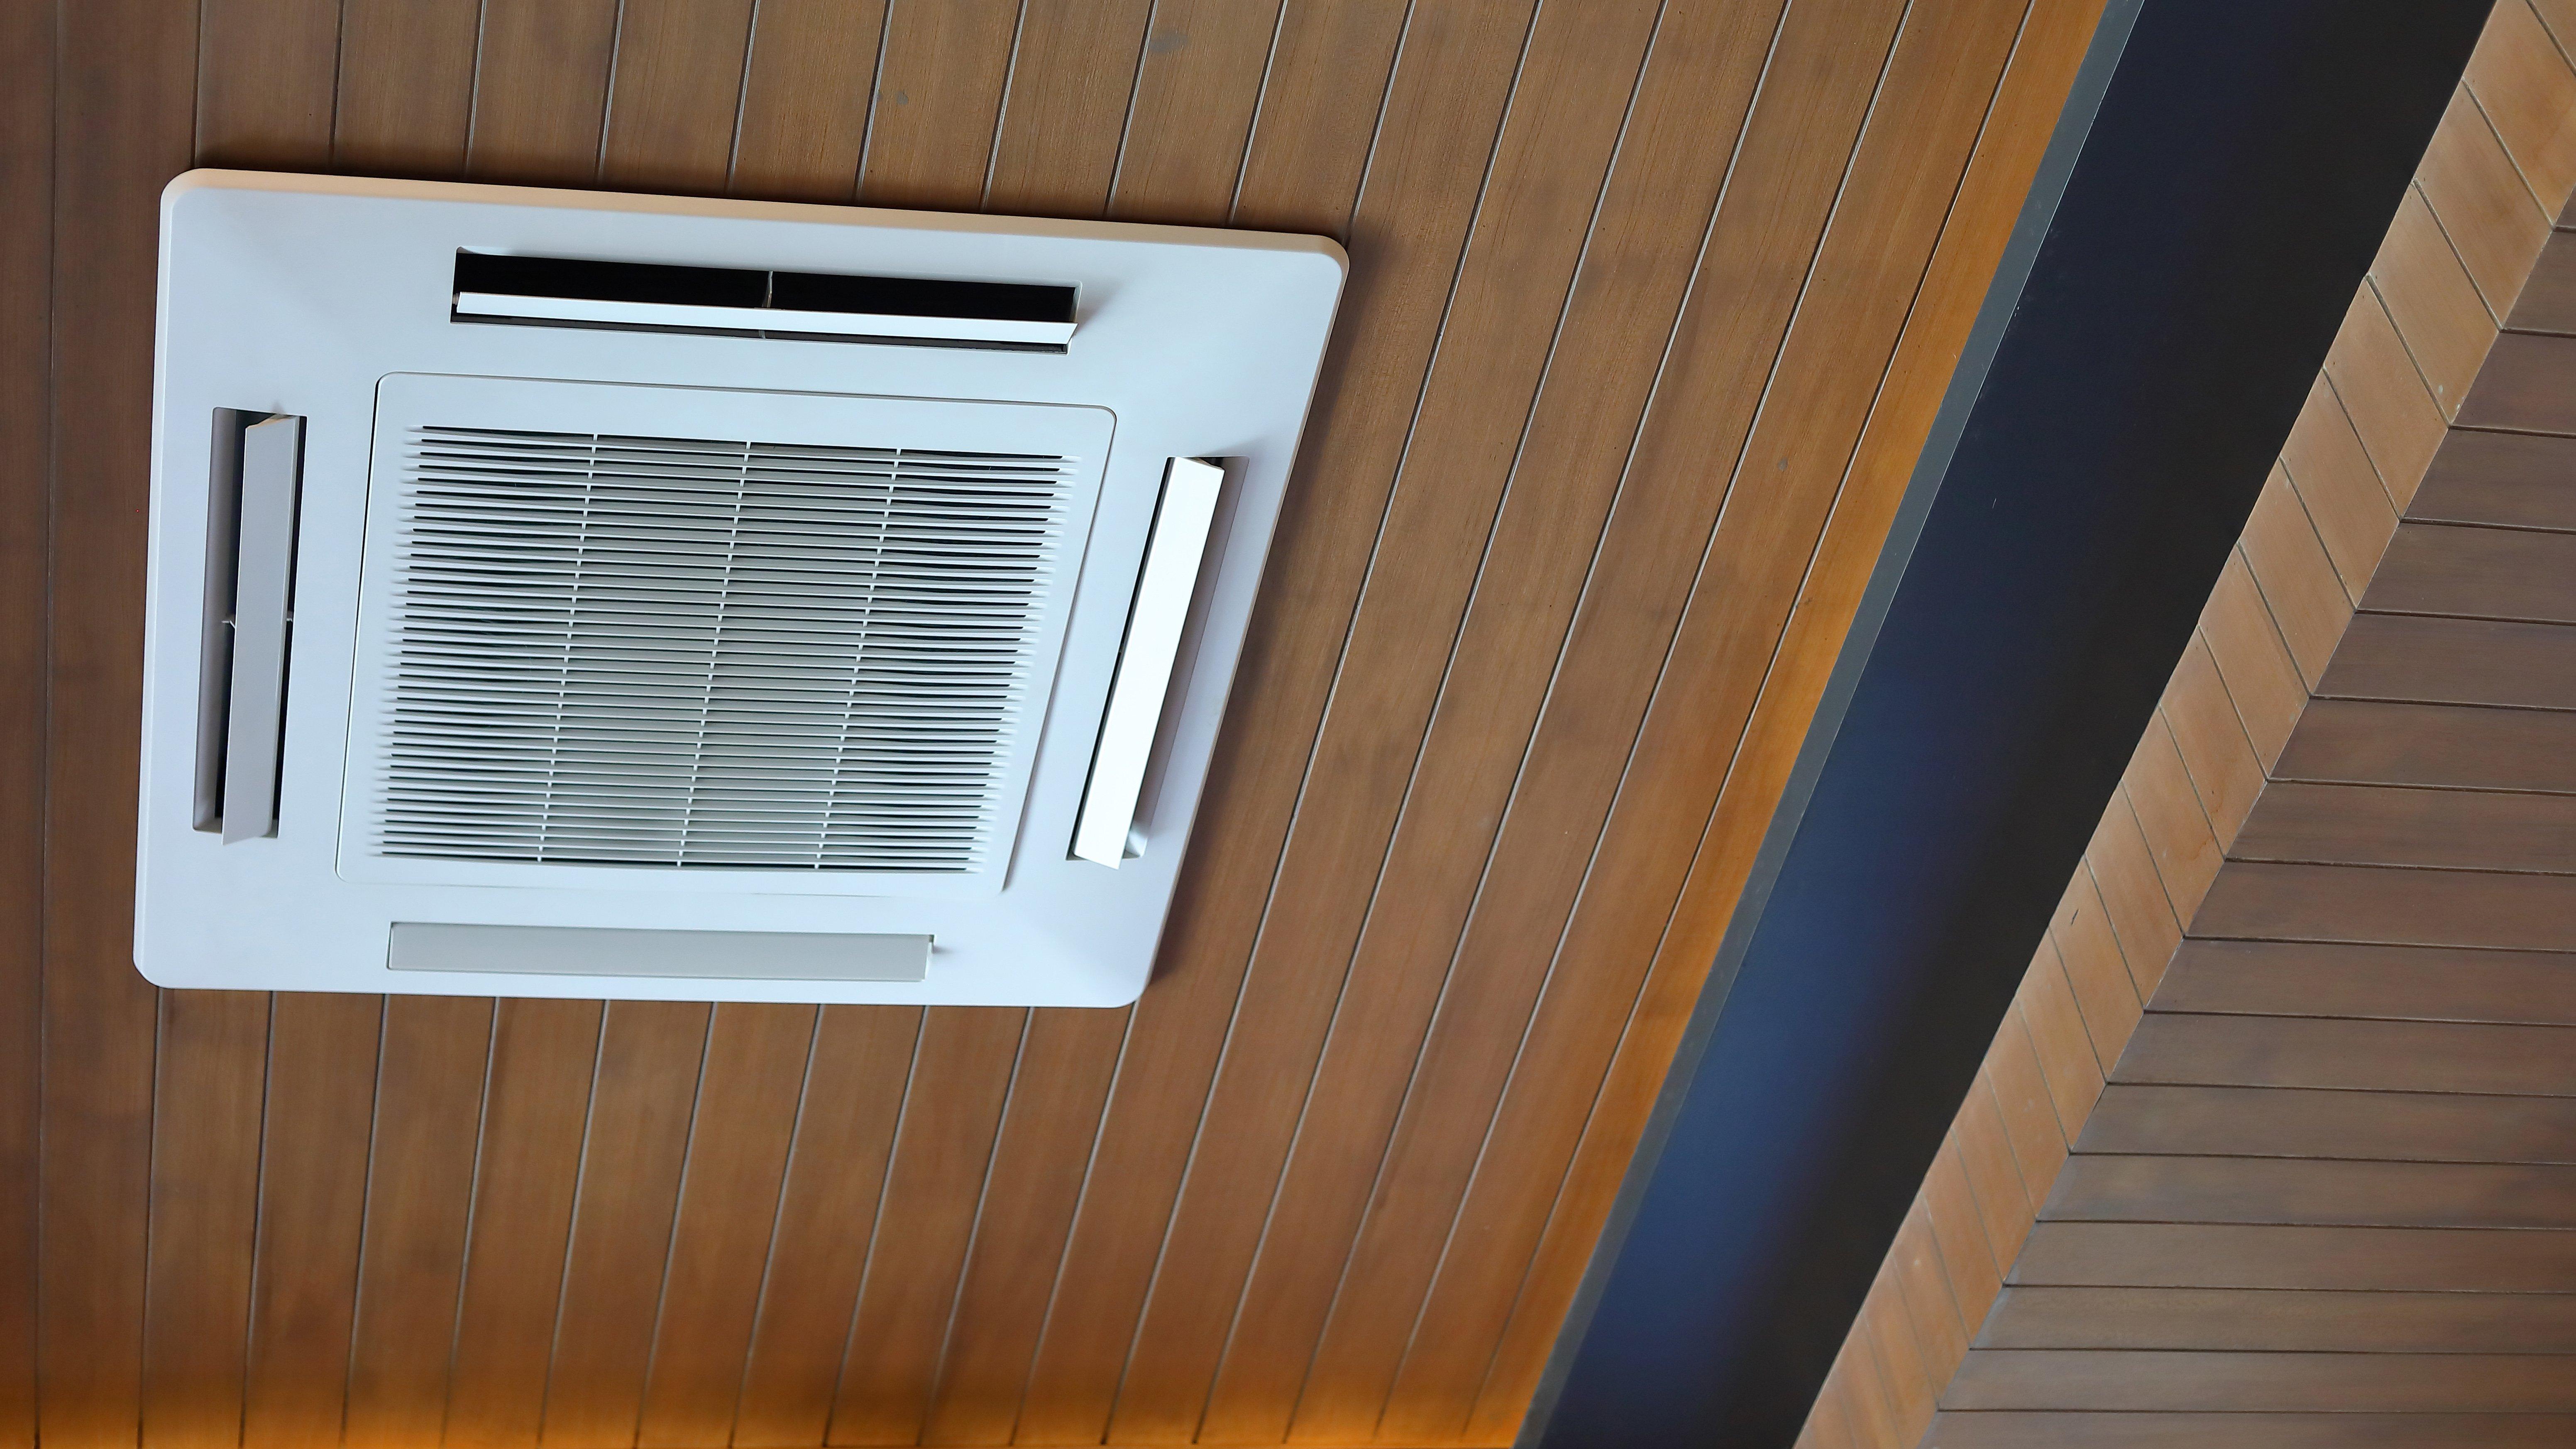 A mini-split air conditioner cooling cassette is installed on a wooden ceiling.